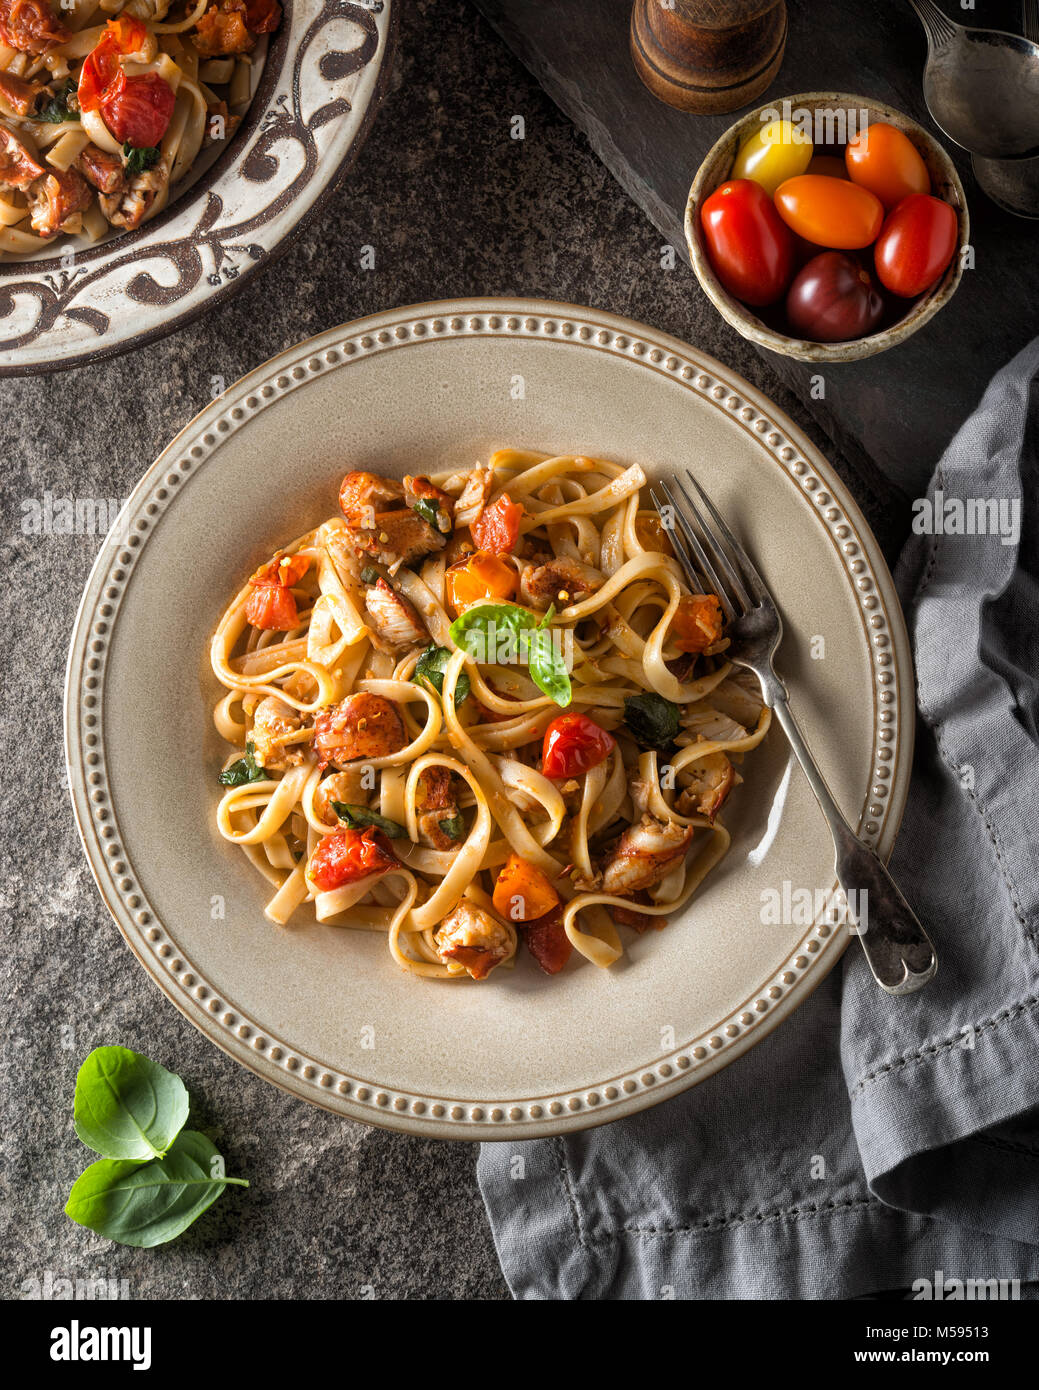 A plate of delicious homemade lobster fettuccine with heirloom tomatoes and basil. Stock Photo